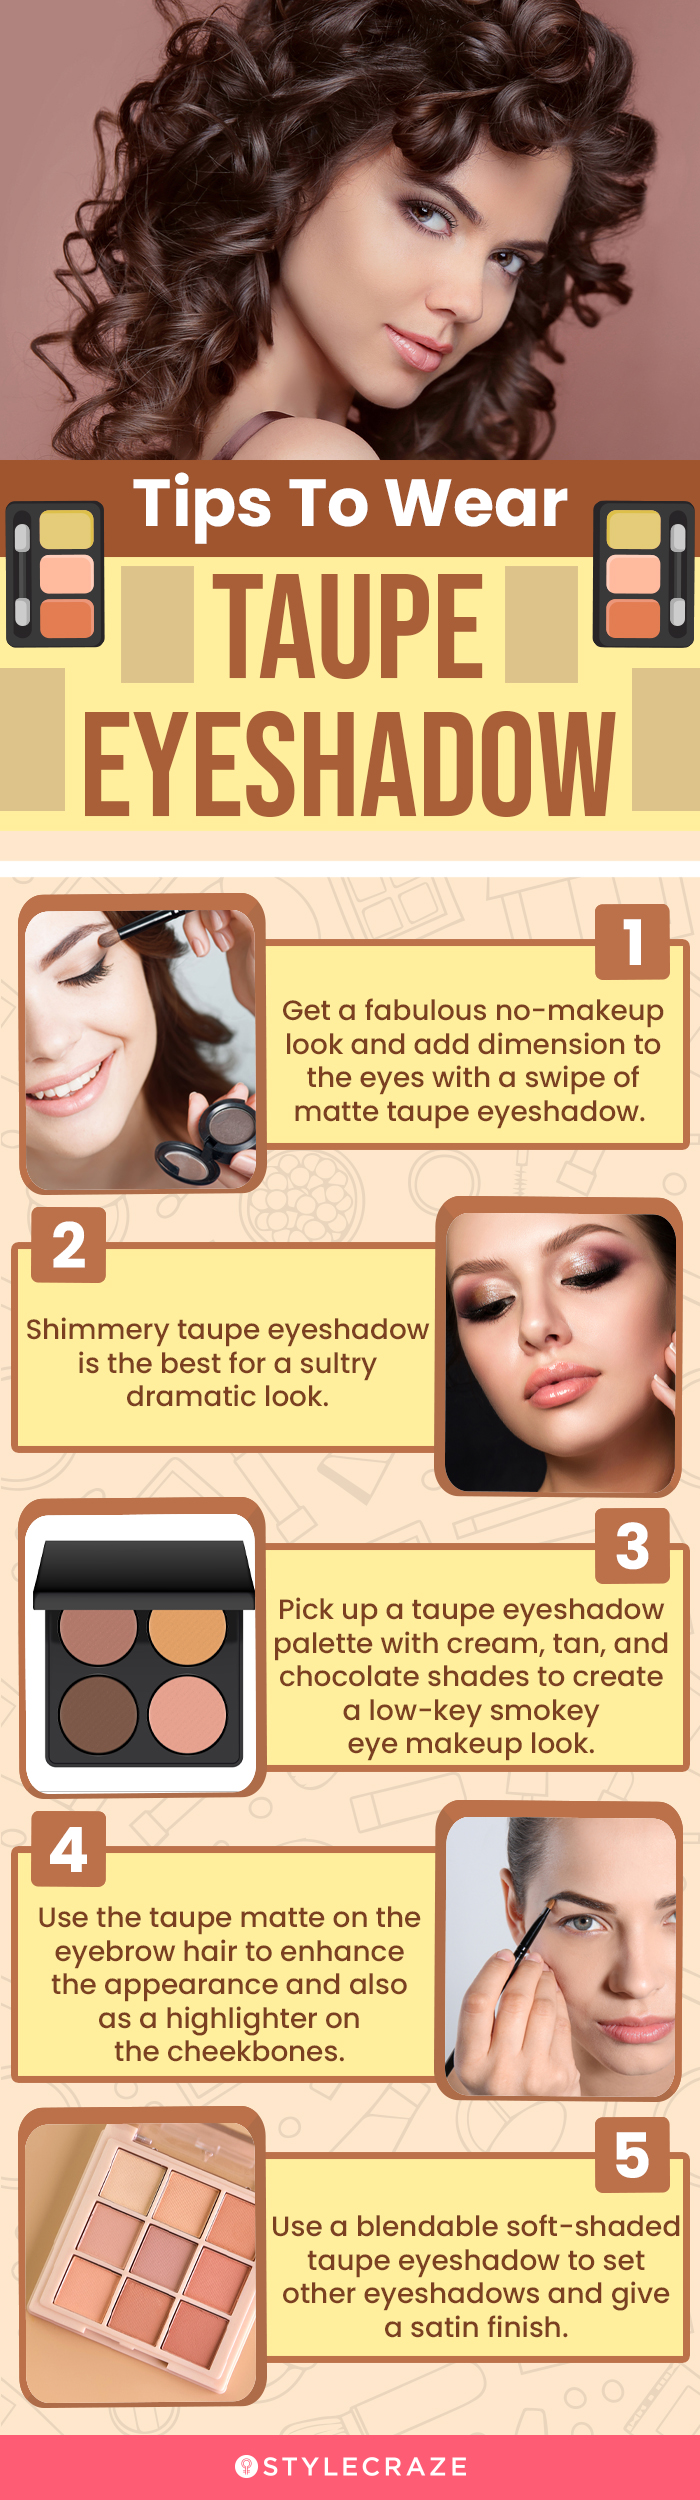 Tips To Wear Taupe Eyeshadow (infographic)